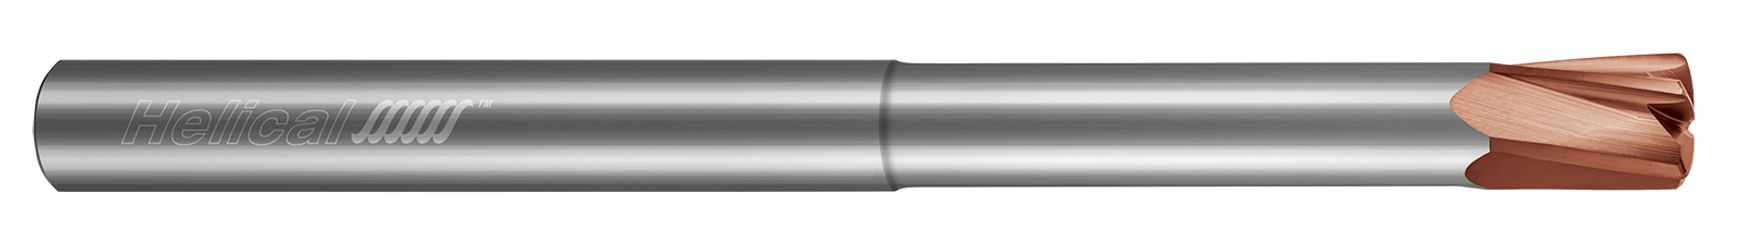 High Feed End Mills-Steels up to 45 Rc-Variable Pitch-Reduced Neck